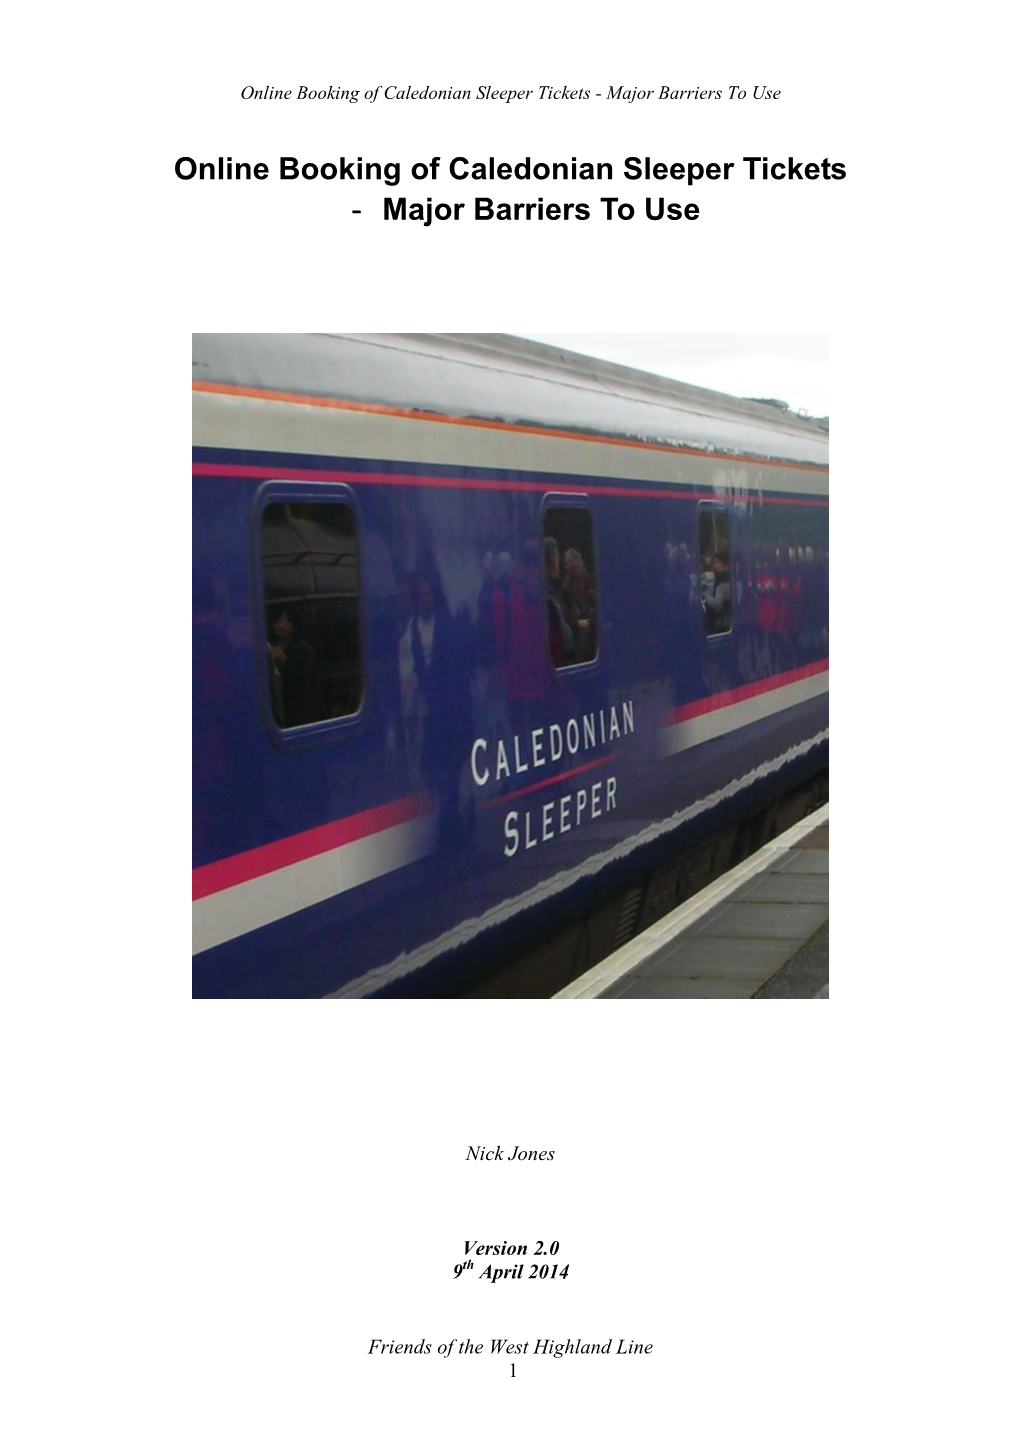 Online Booking of Caledonian Sleeper Tickets - Major Barriers to Use